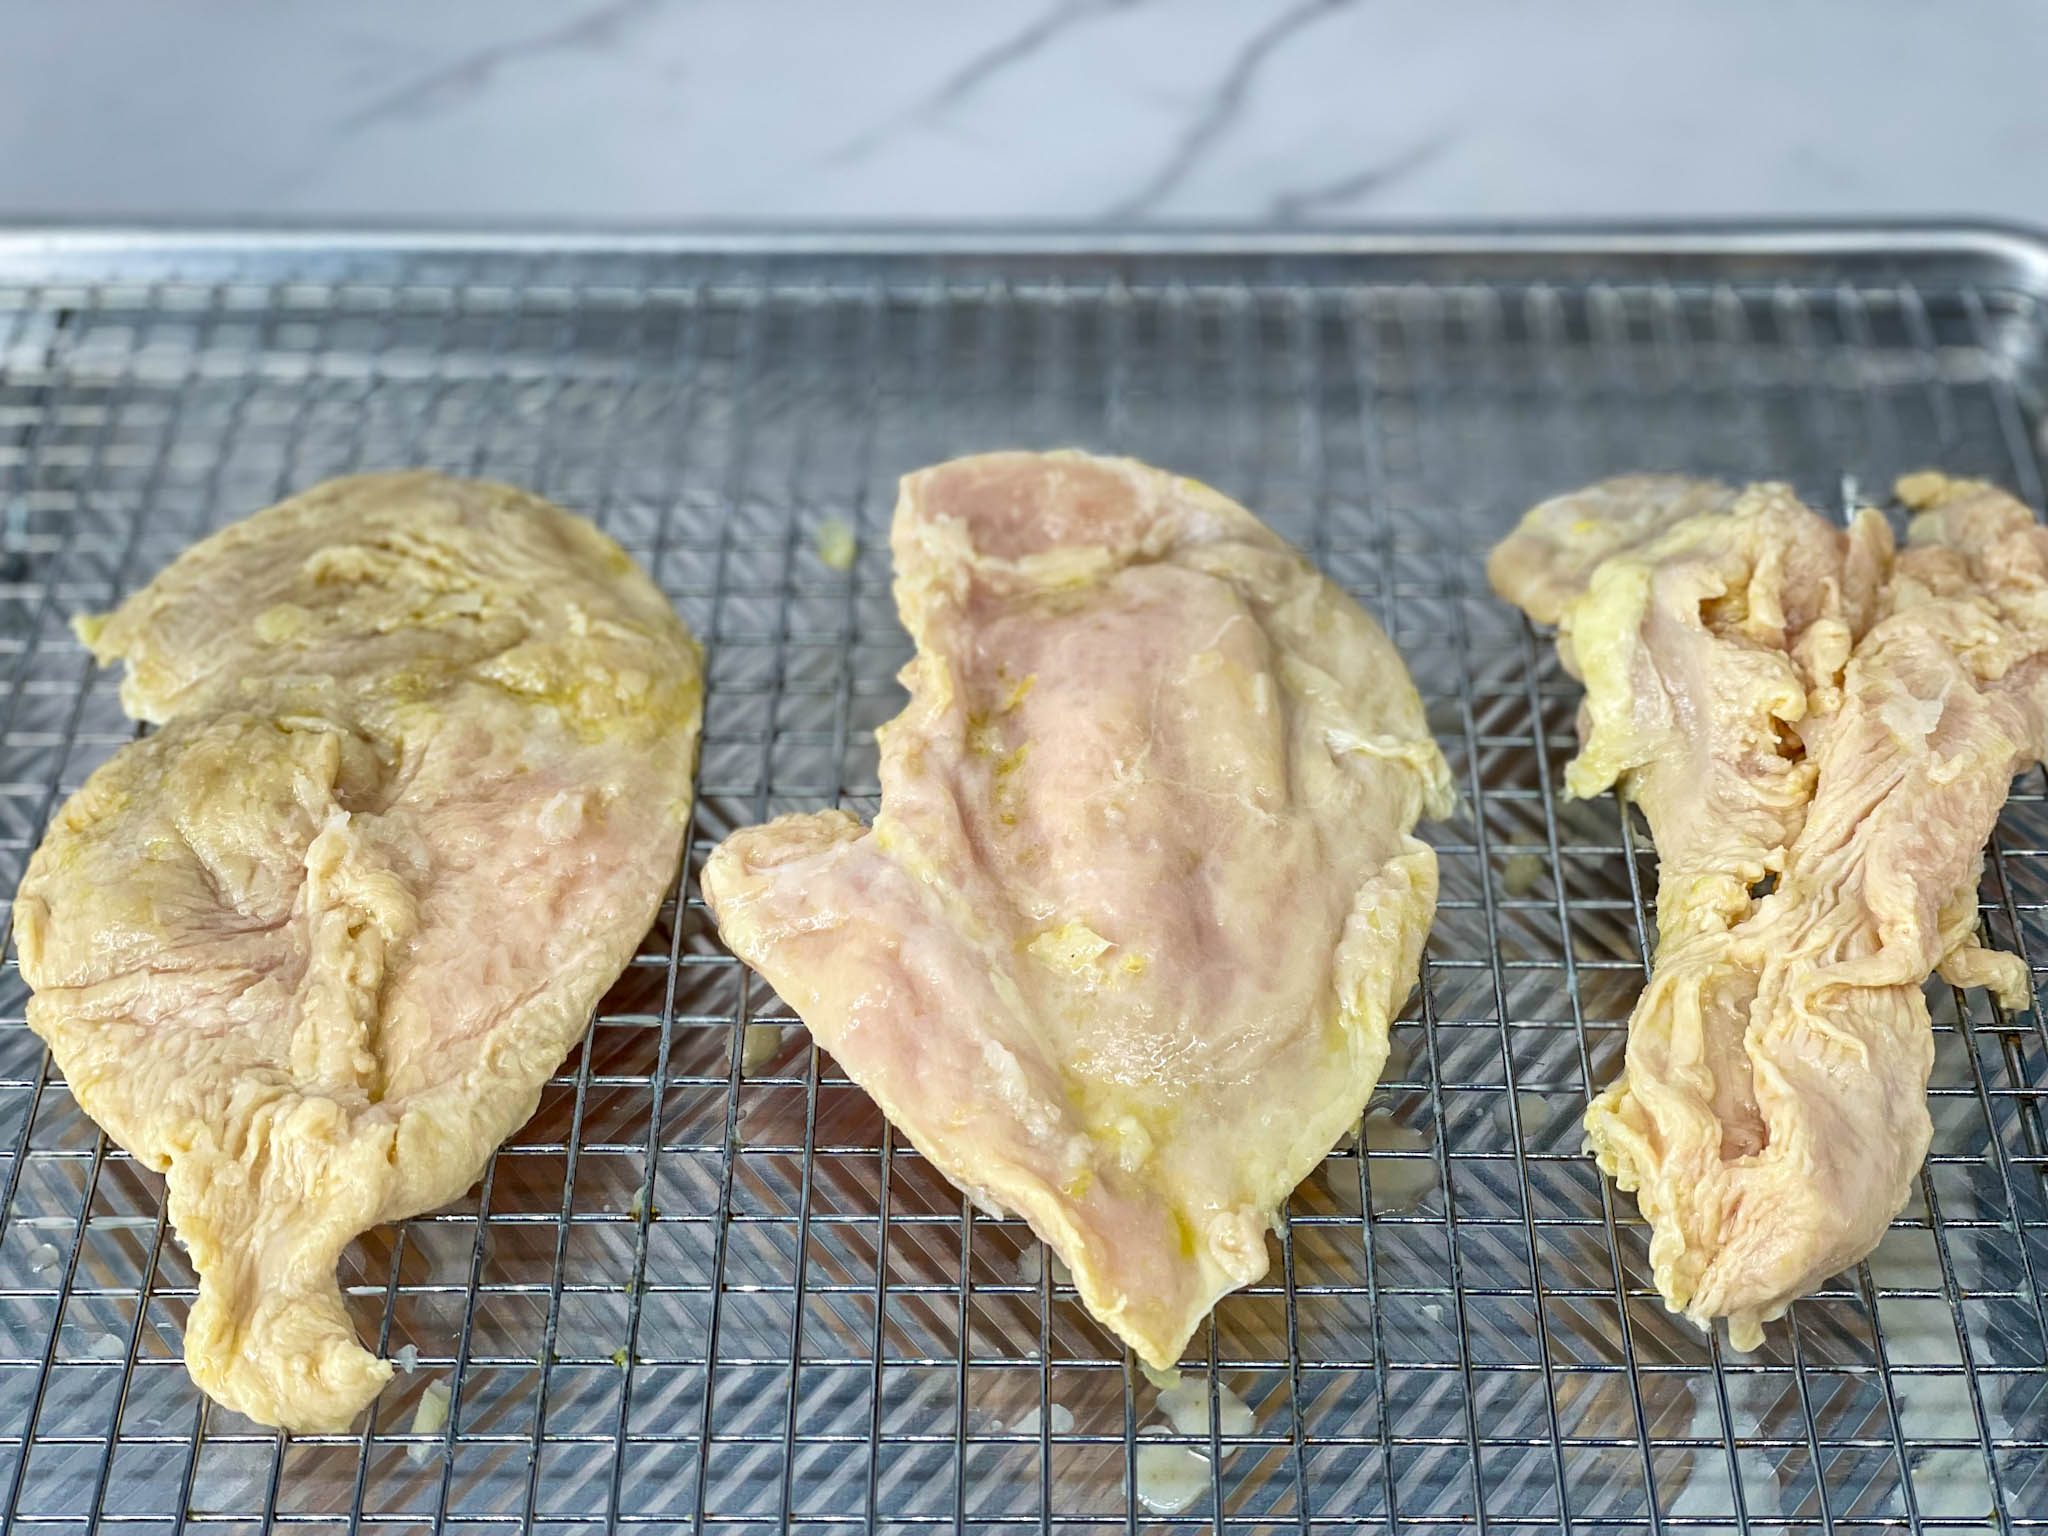 Chicken breast that has been marinated in naranja agria, lime juice and garlic on a wire rack.